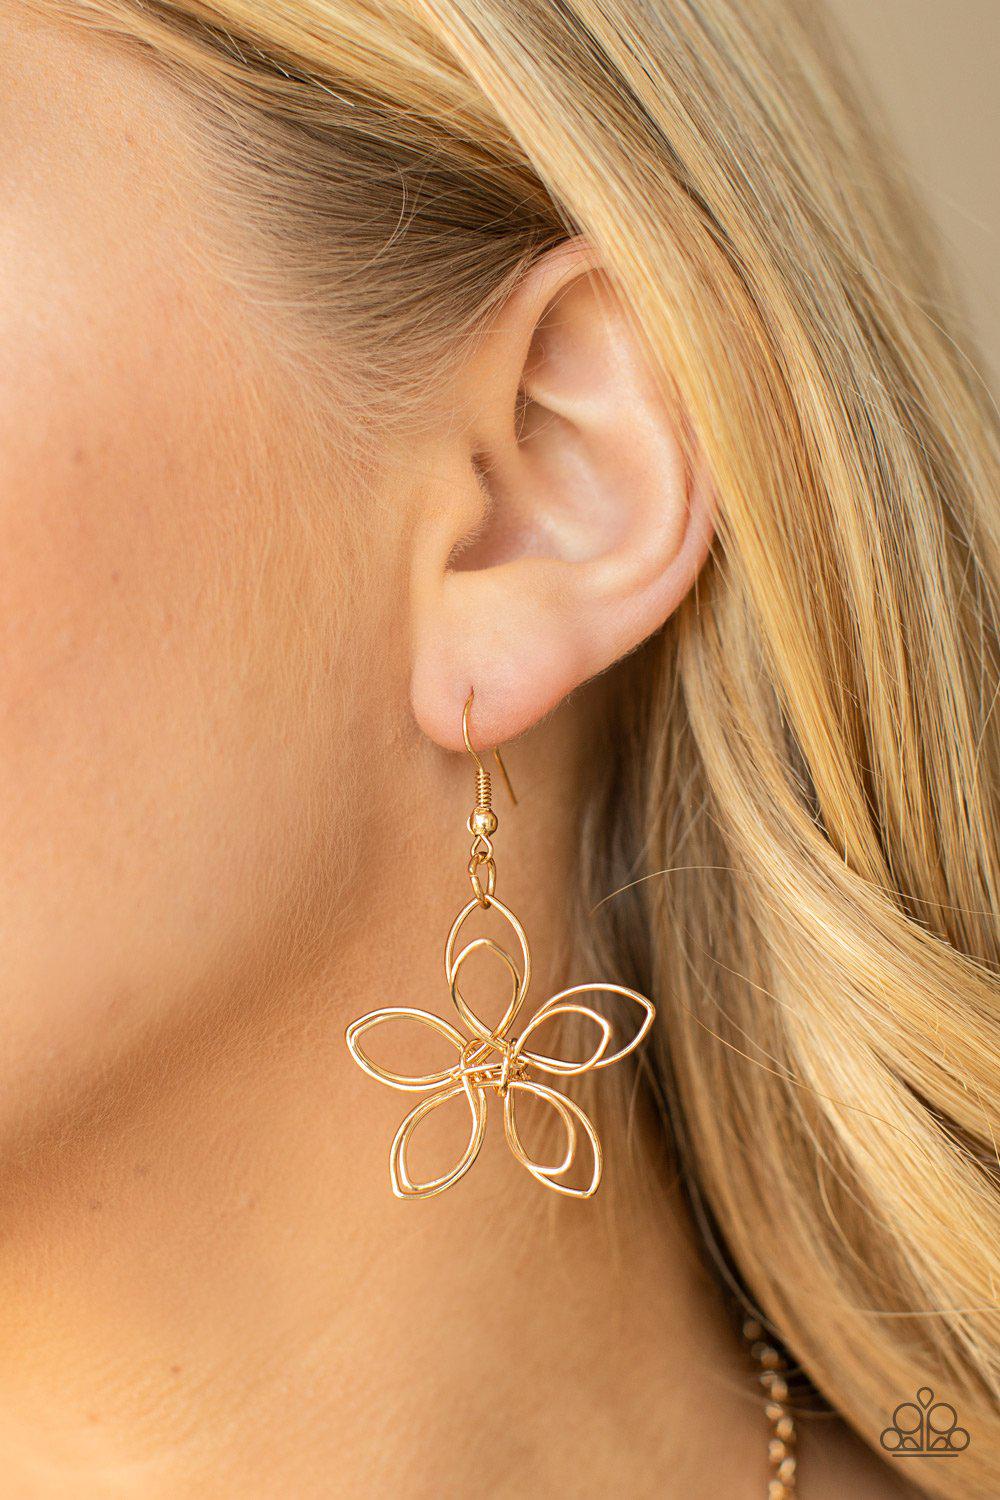 Flower Garden Fashionista Gold Wire Flower Necklace - Paparazzi Accessories - free matching earrings - CarasShop.com - $5 Jewelry by Cara Jewels